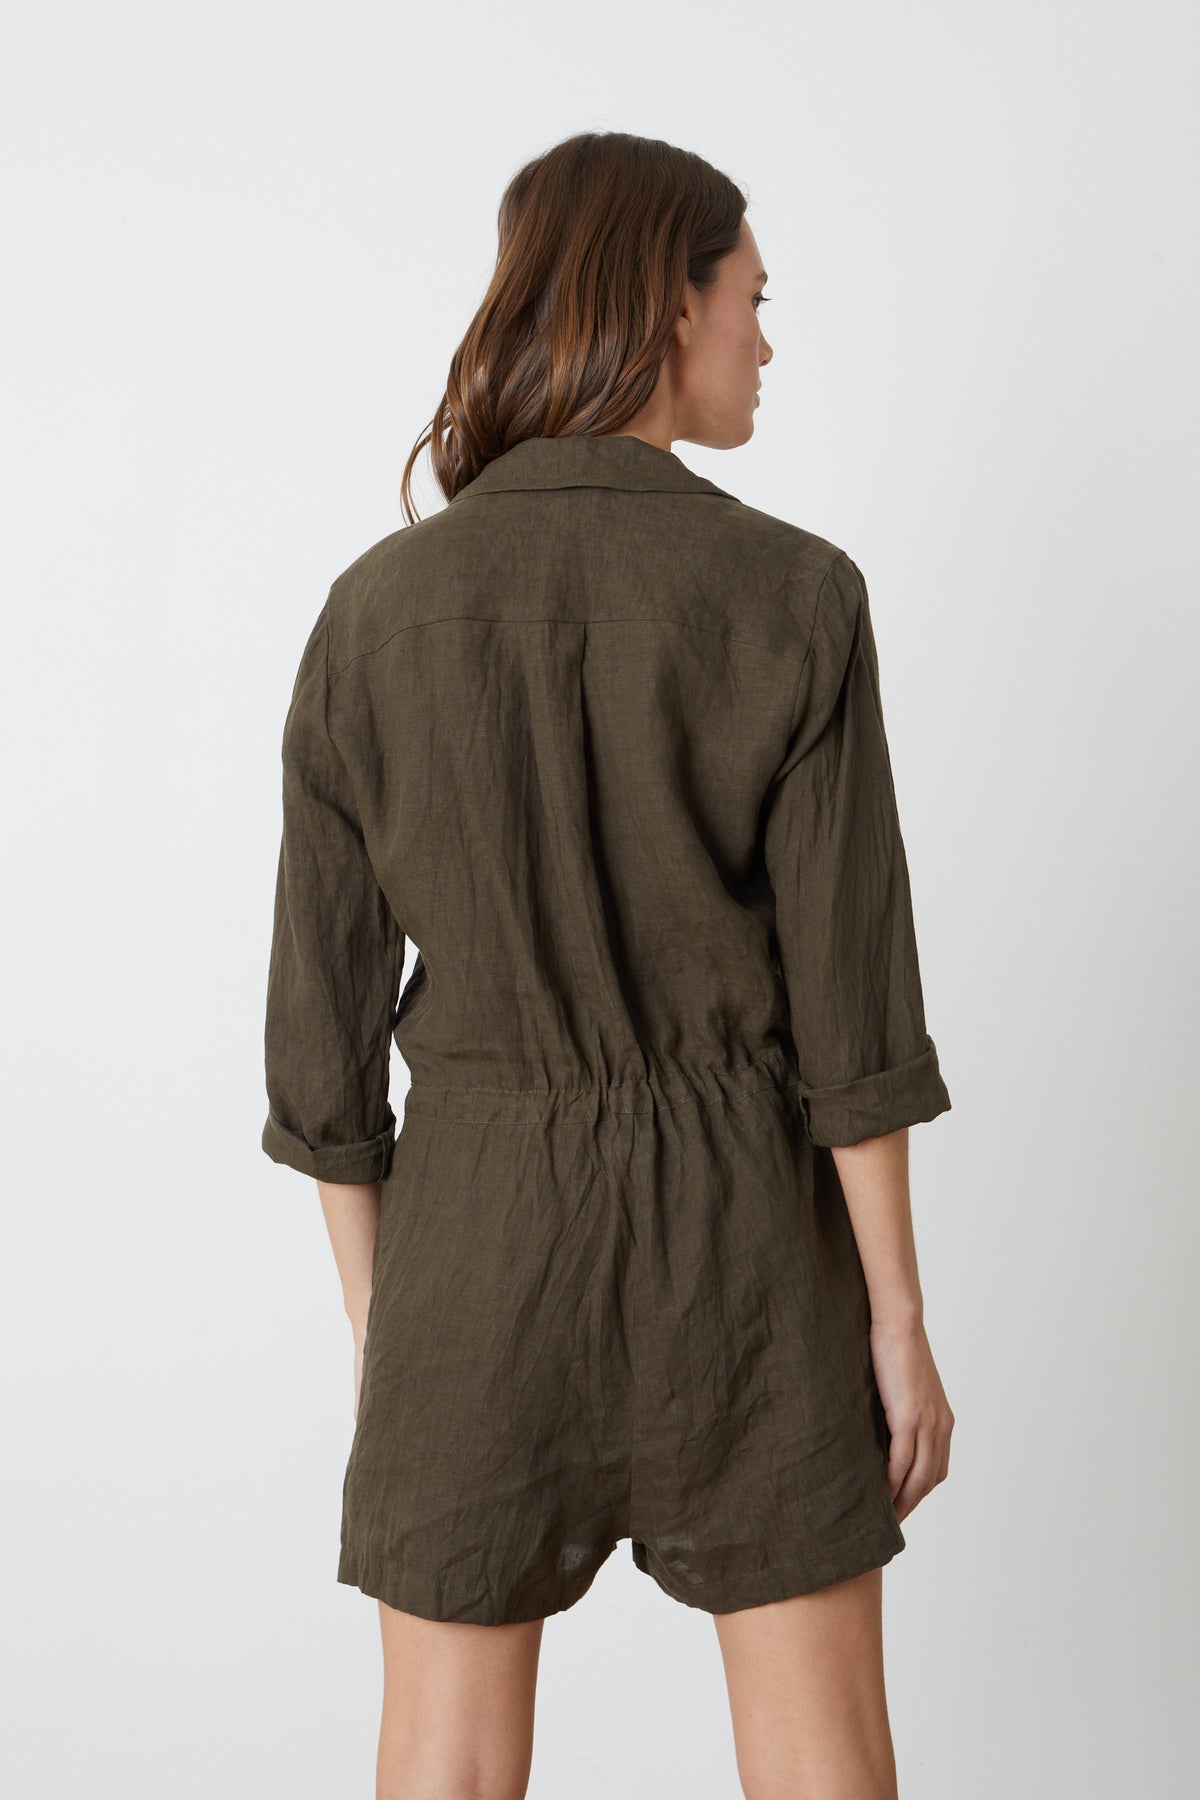 the back view of a woman wearing an olive Velvet by Graham & Spencer RUTH LINEN ROMPER.-26327261380801